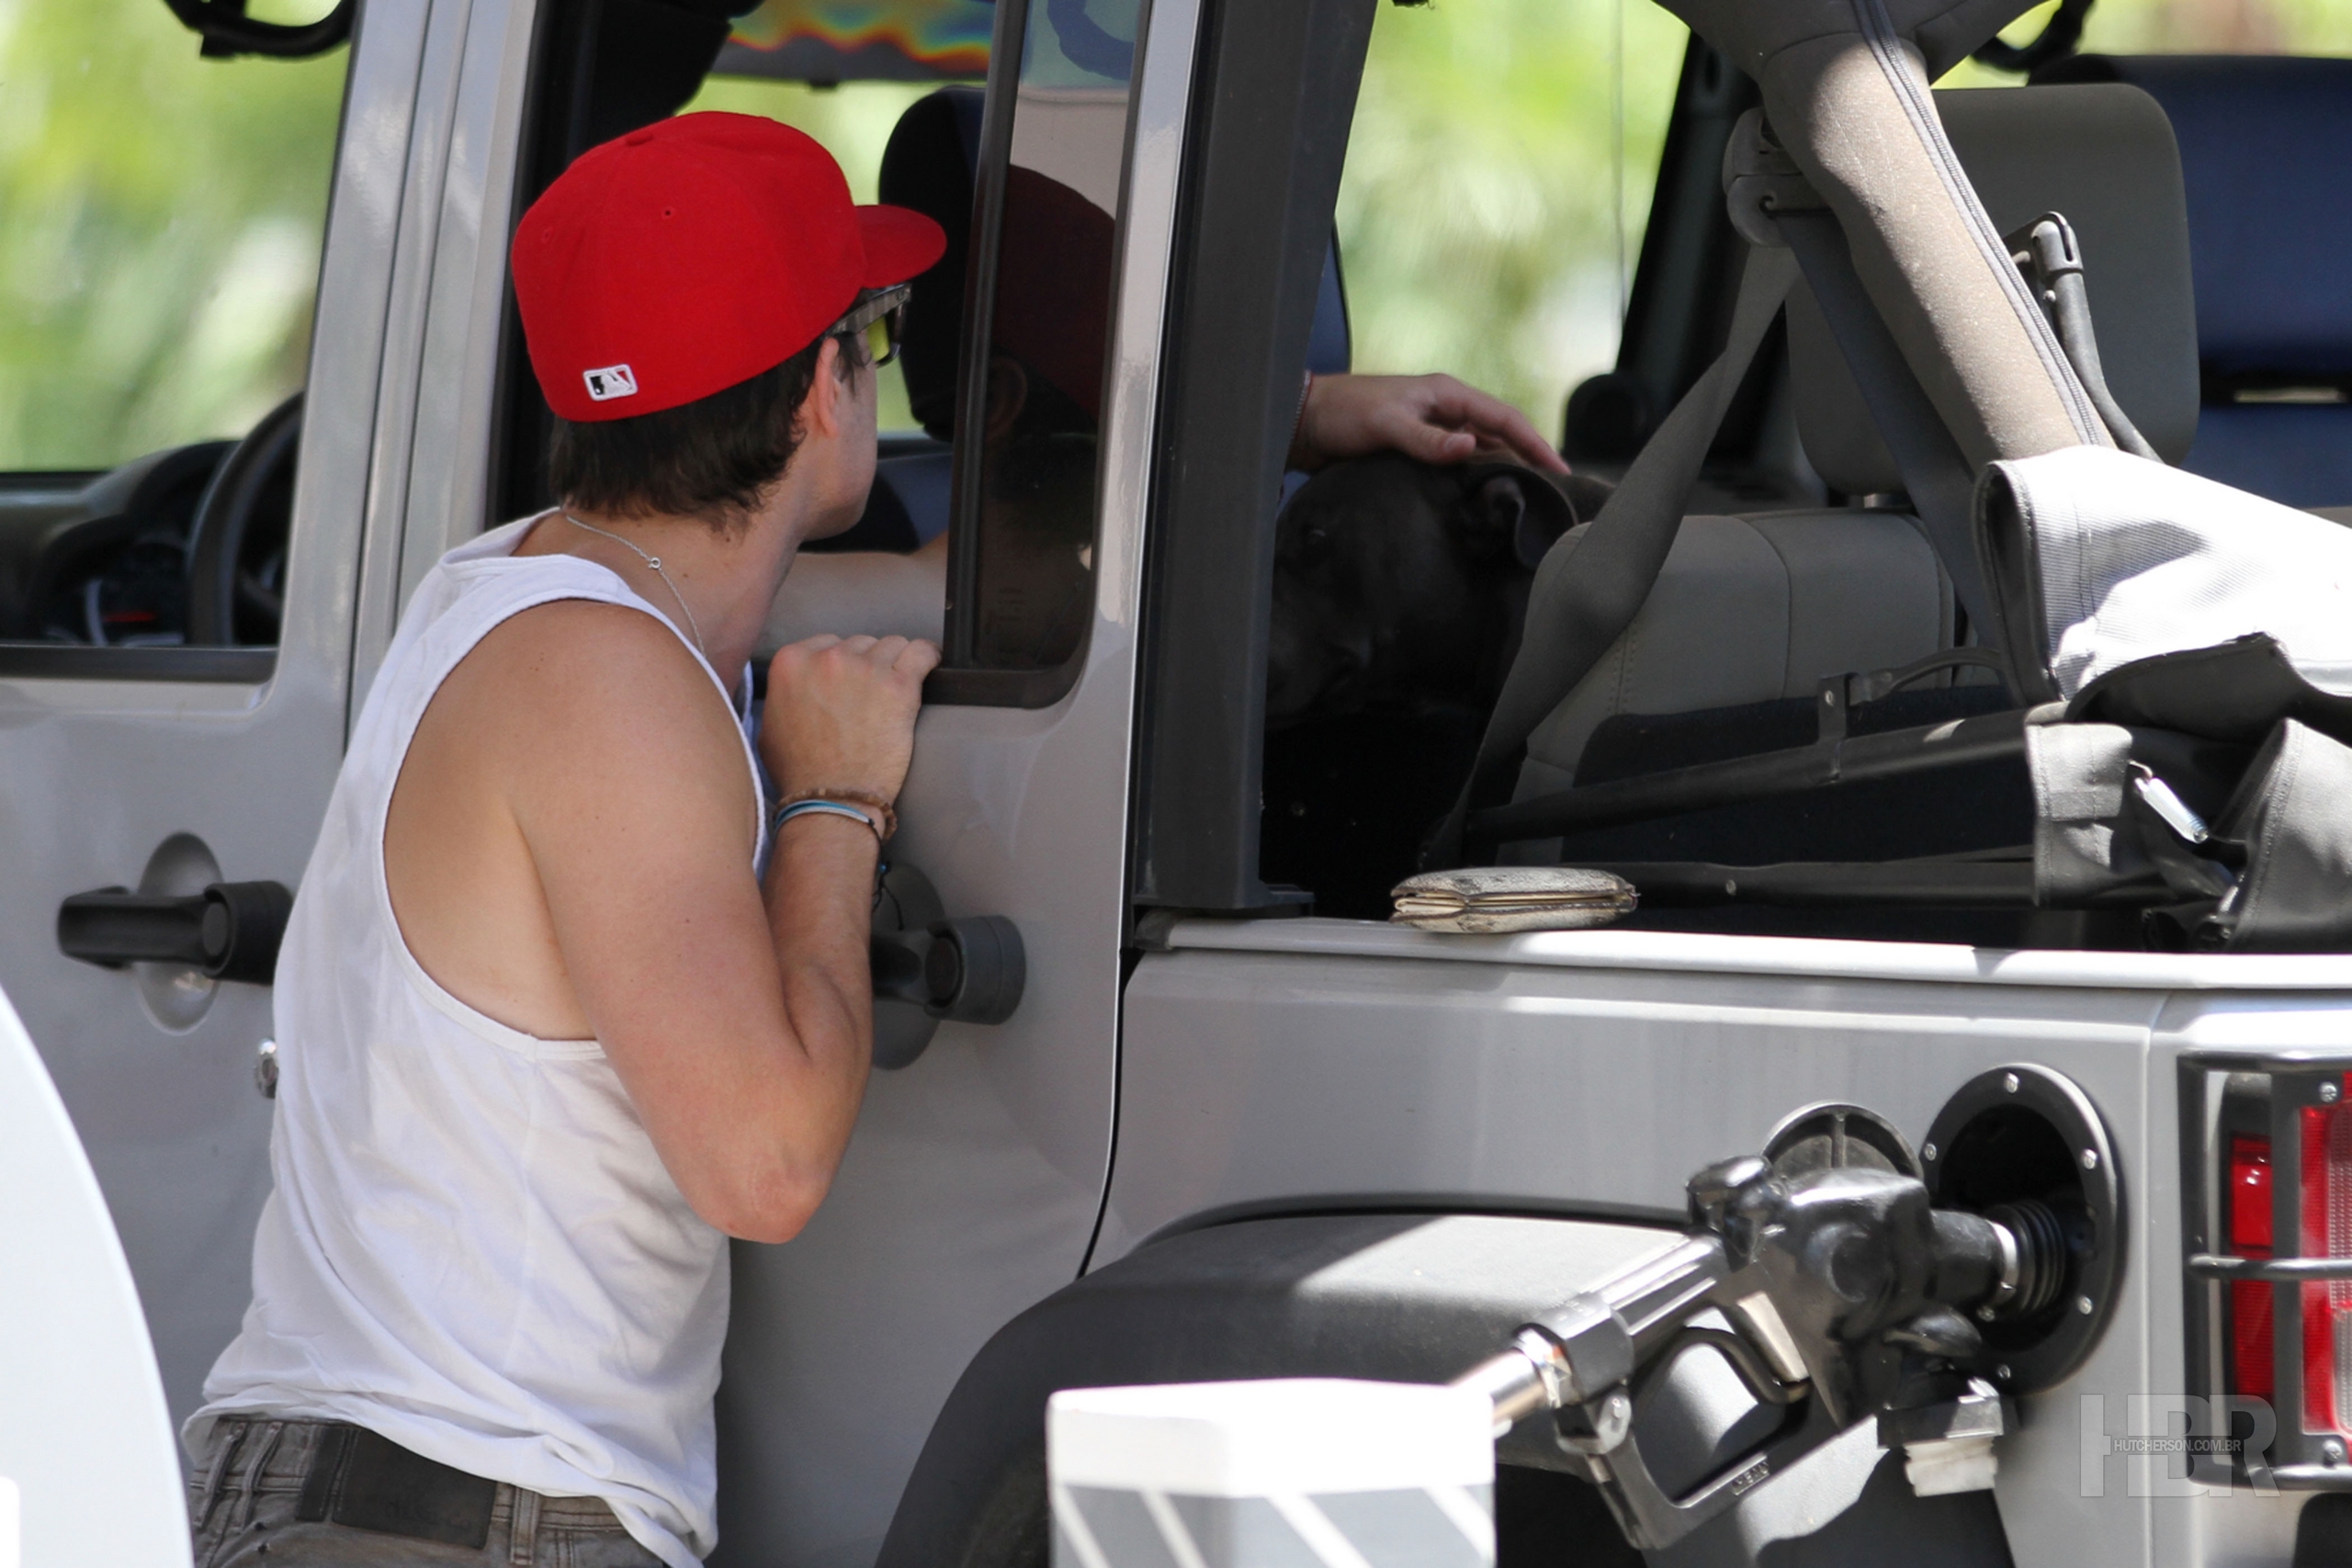 Josh puts gas in his car with his dog, Driver.